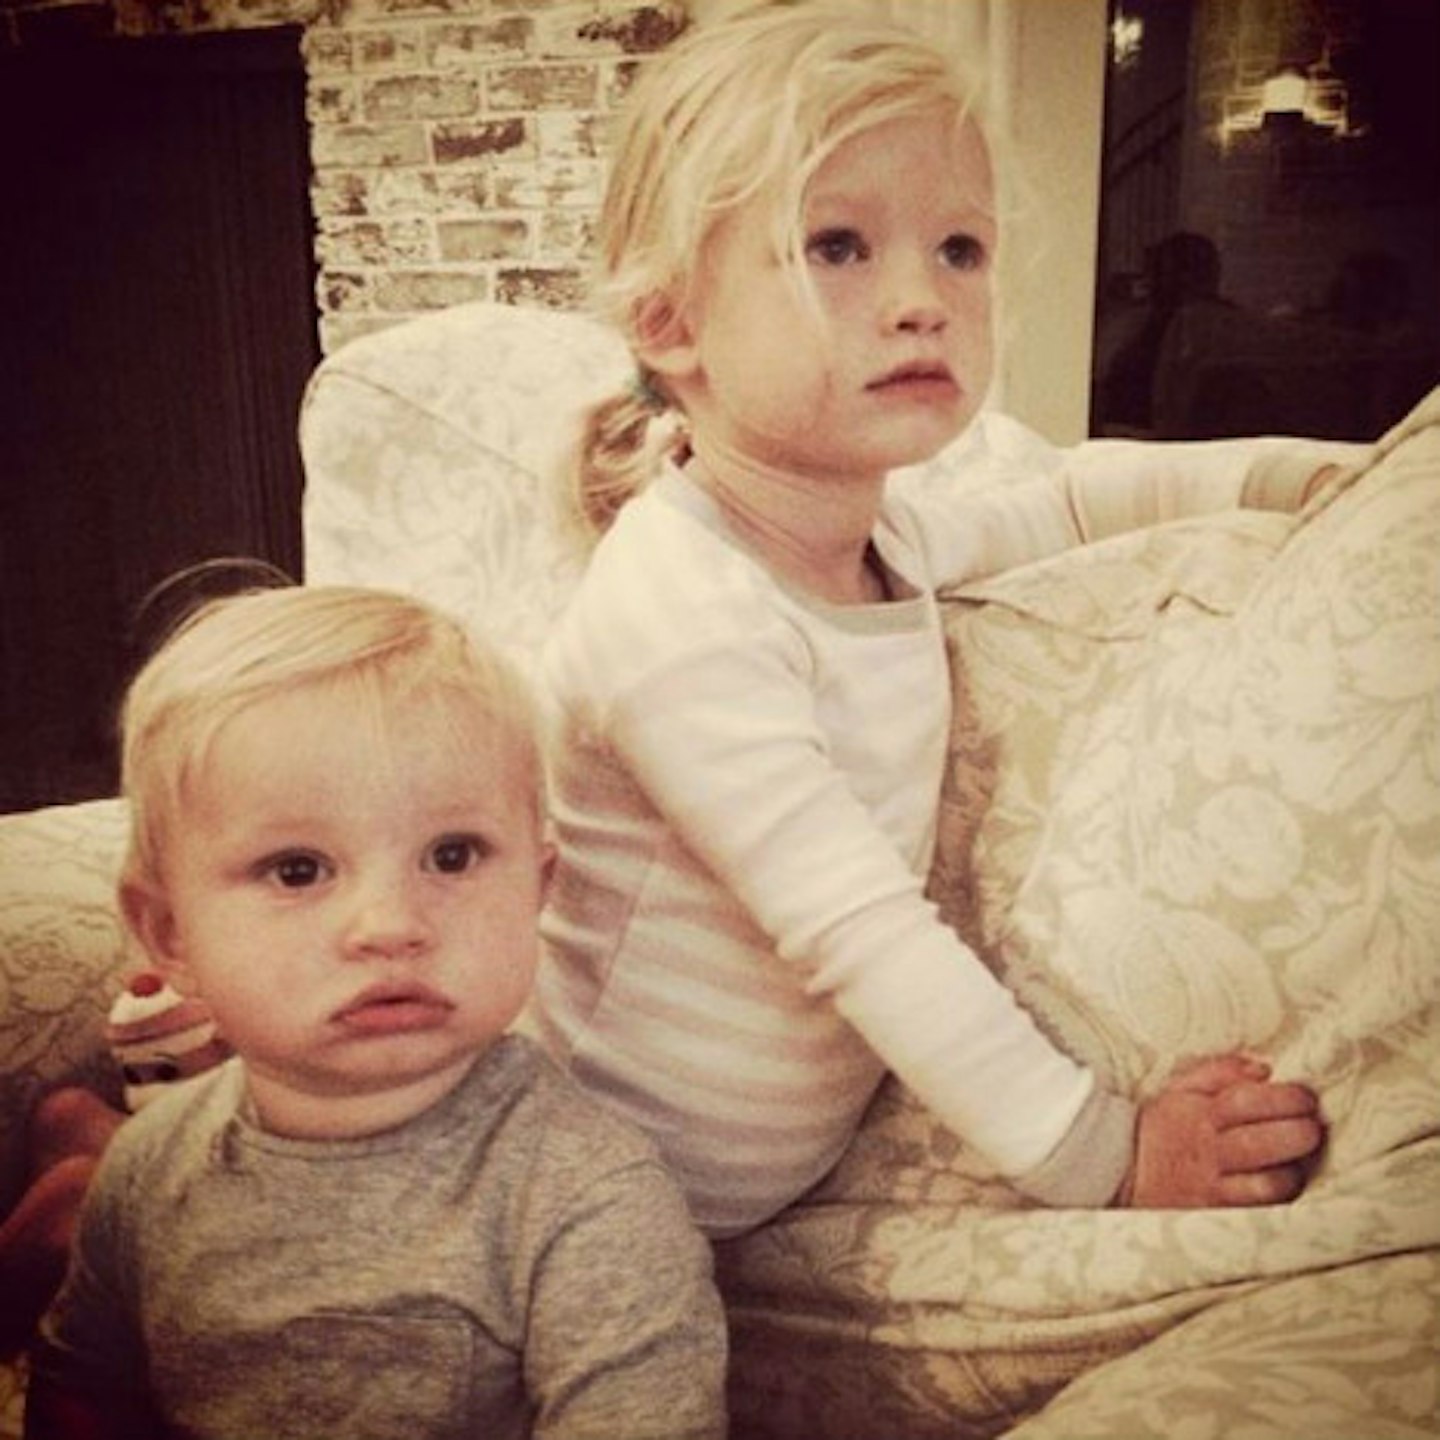 Jessica's children Maxwell and Ace are adorable